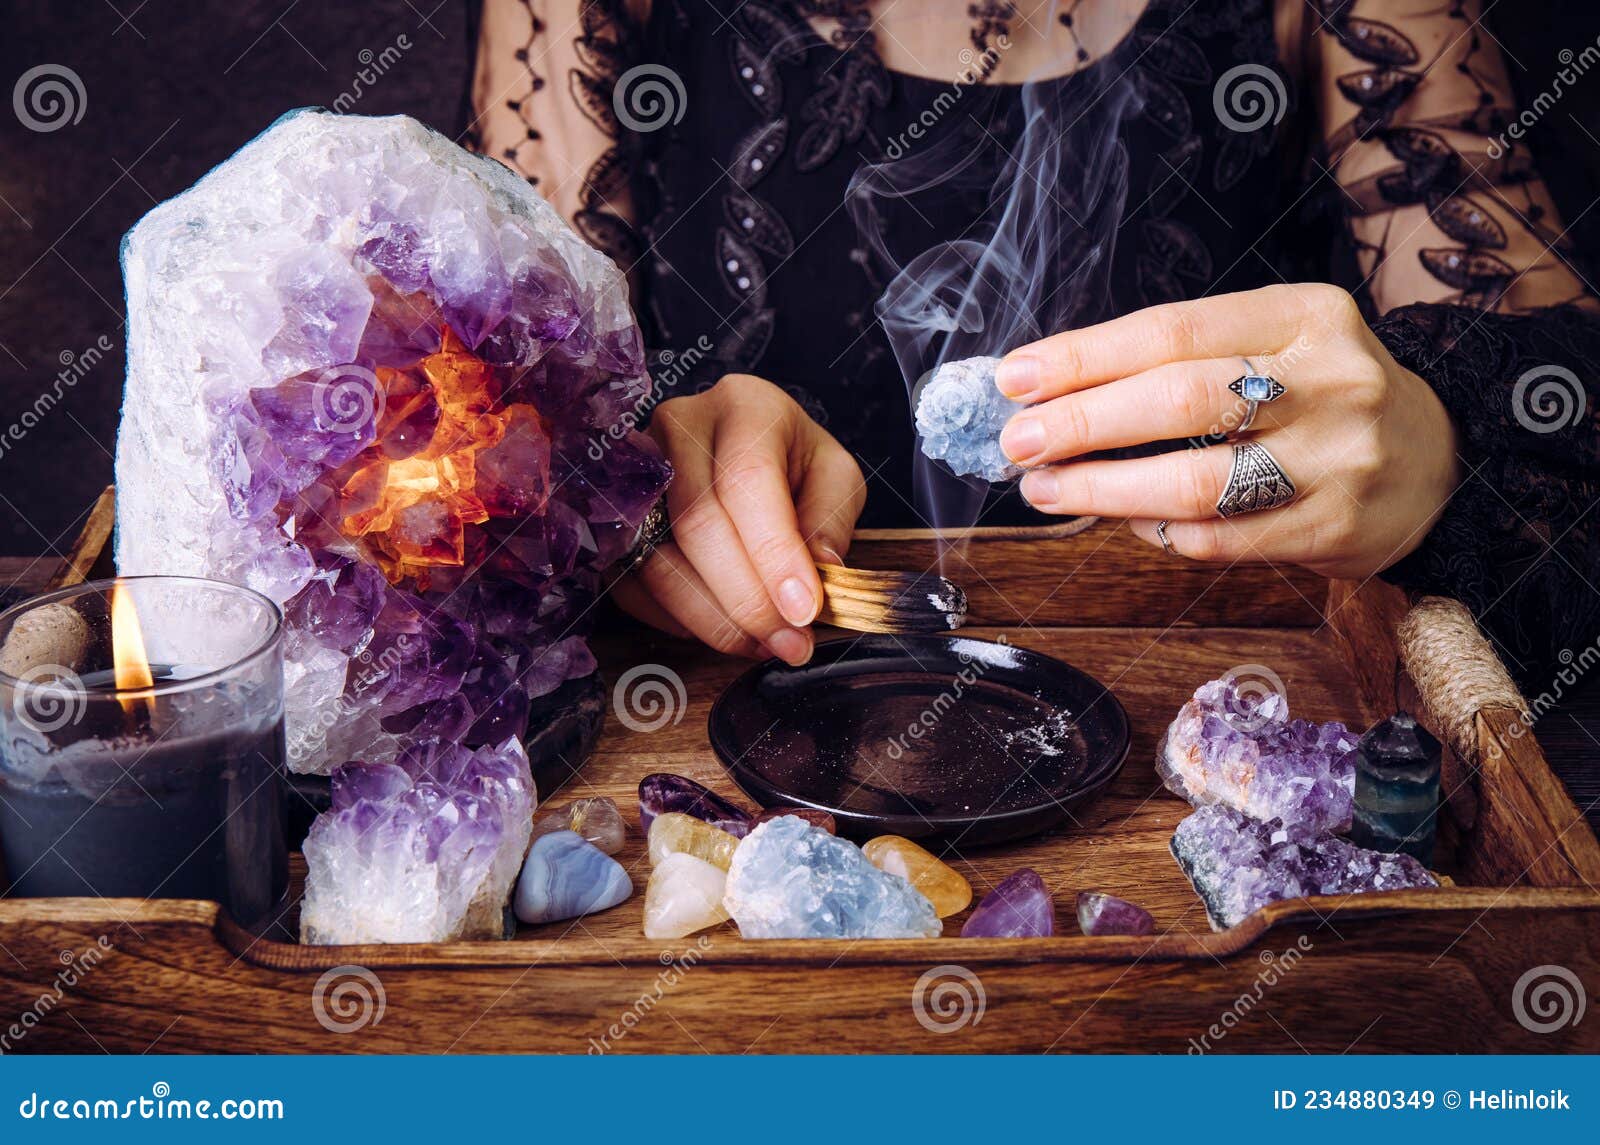 glamorous woman in black dress cleansing crystals gemstones by smudging palo santo wood stick.